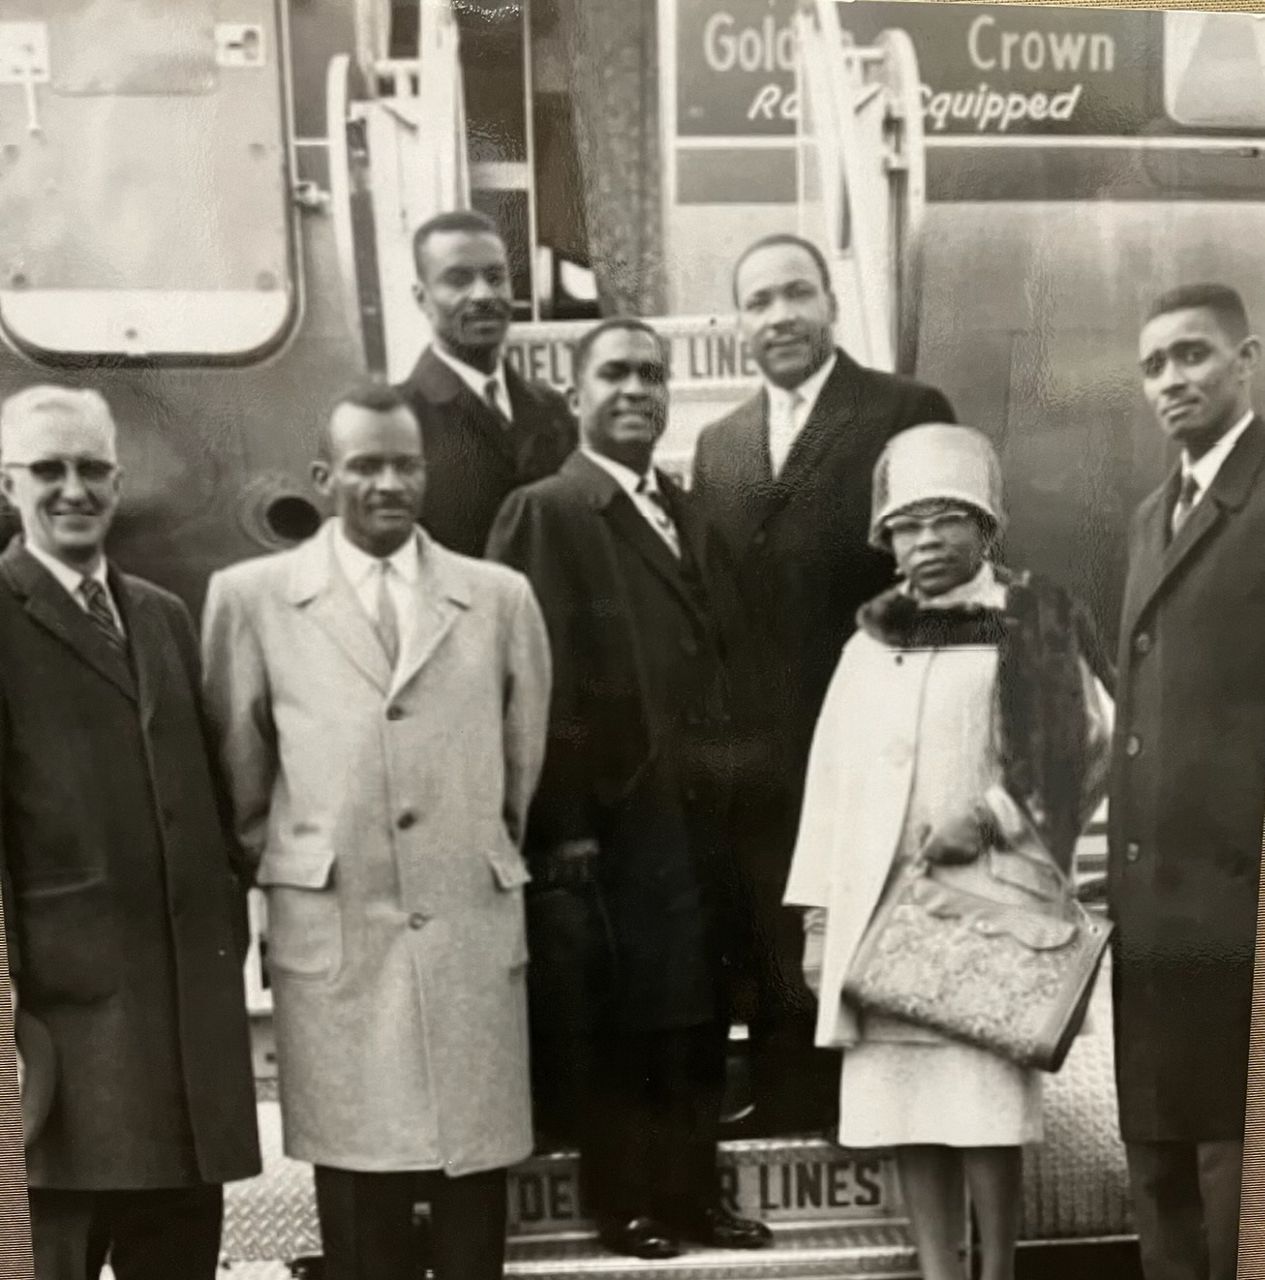 A photo taken during Dr. Martin Luther King Jr. visit to Cincinnati in 1964. Pictured from left to right: The Rev. Maurice McCracken, the Rev. T.L. Lane, the Rev. Fred L Shuttlesworth, the Rev L.V. Booth, Dr. Martin Luther King Jr. , Louise Shropshire and the Rev. Otis Moss Jr. (Photo courtesy of Paul Booth)